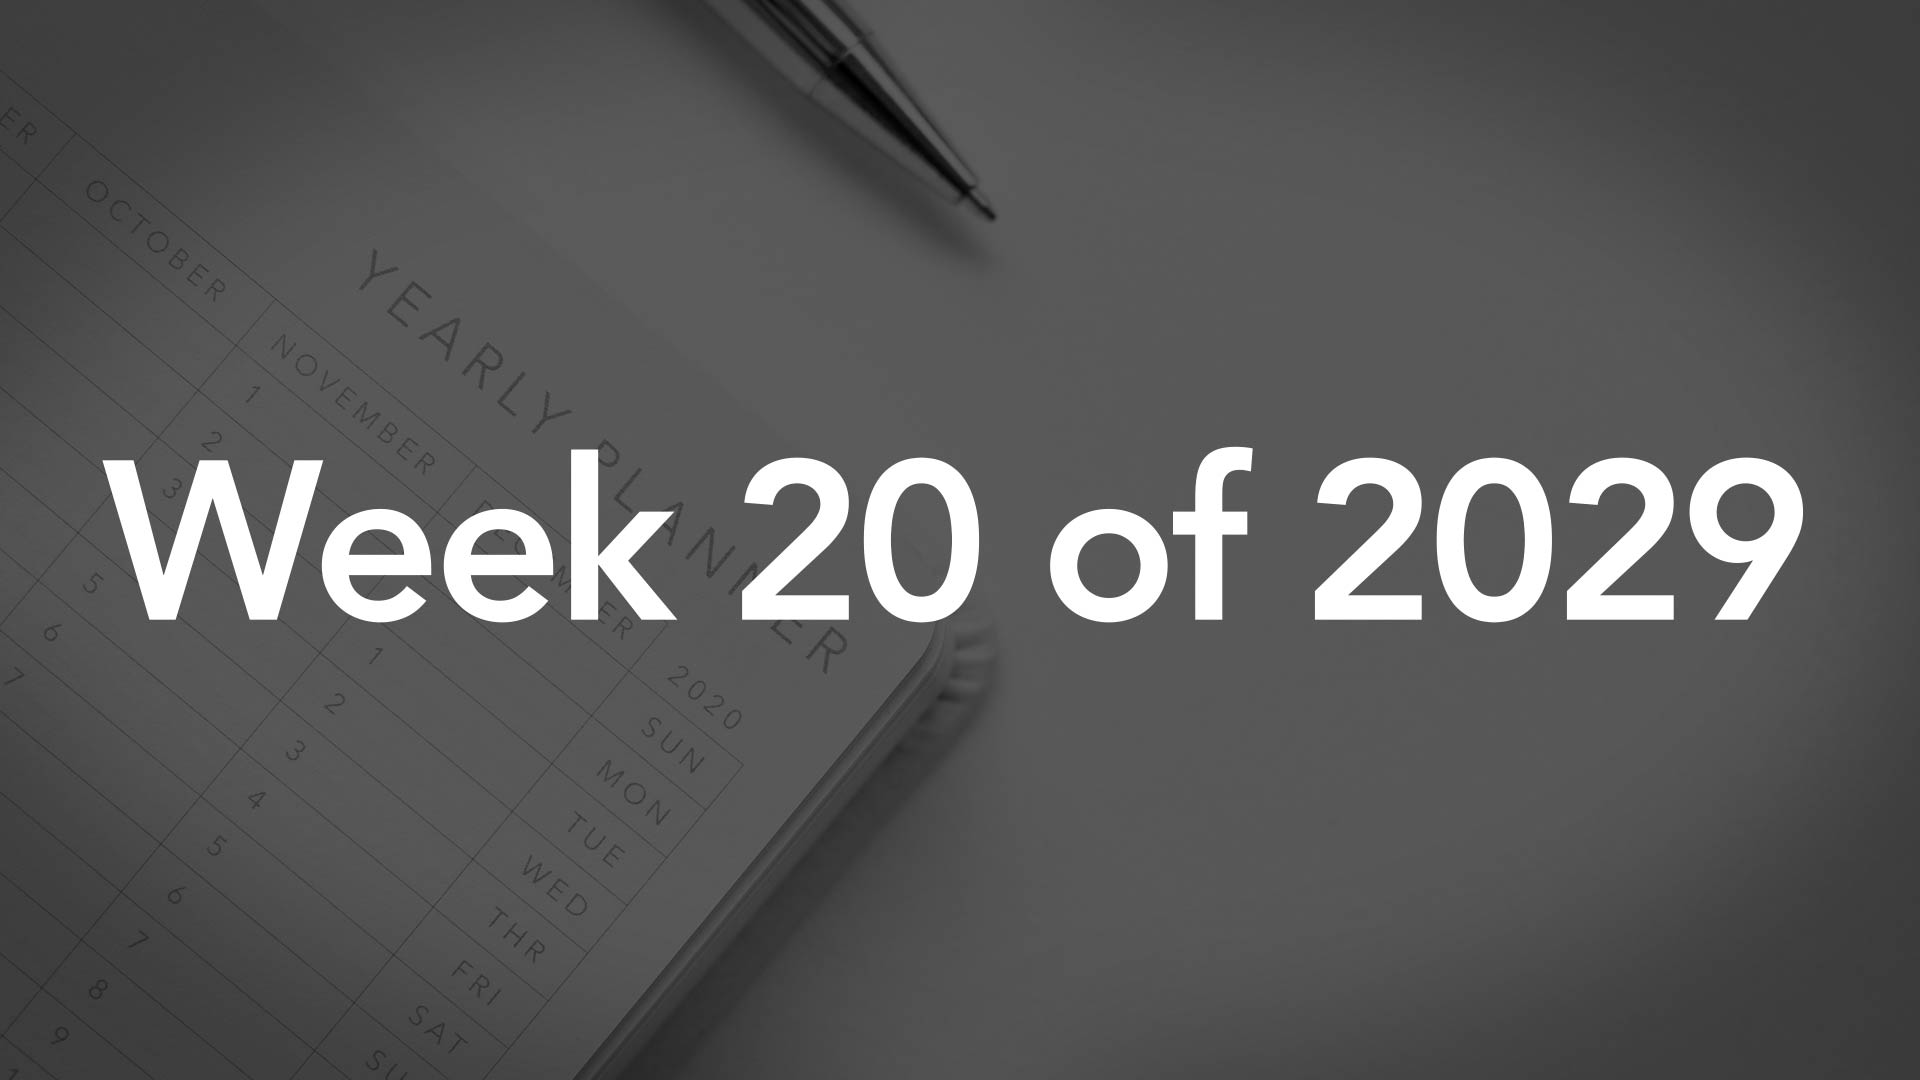 Title Image for Week 20 of 2029